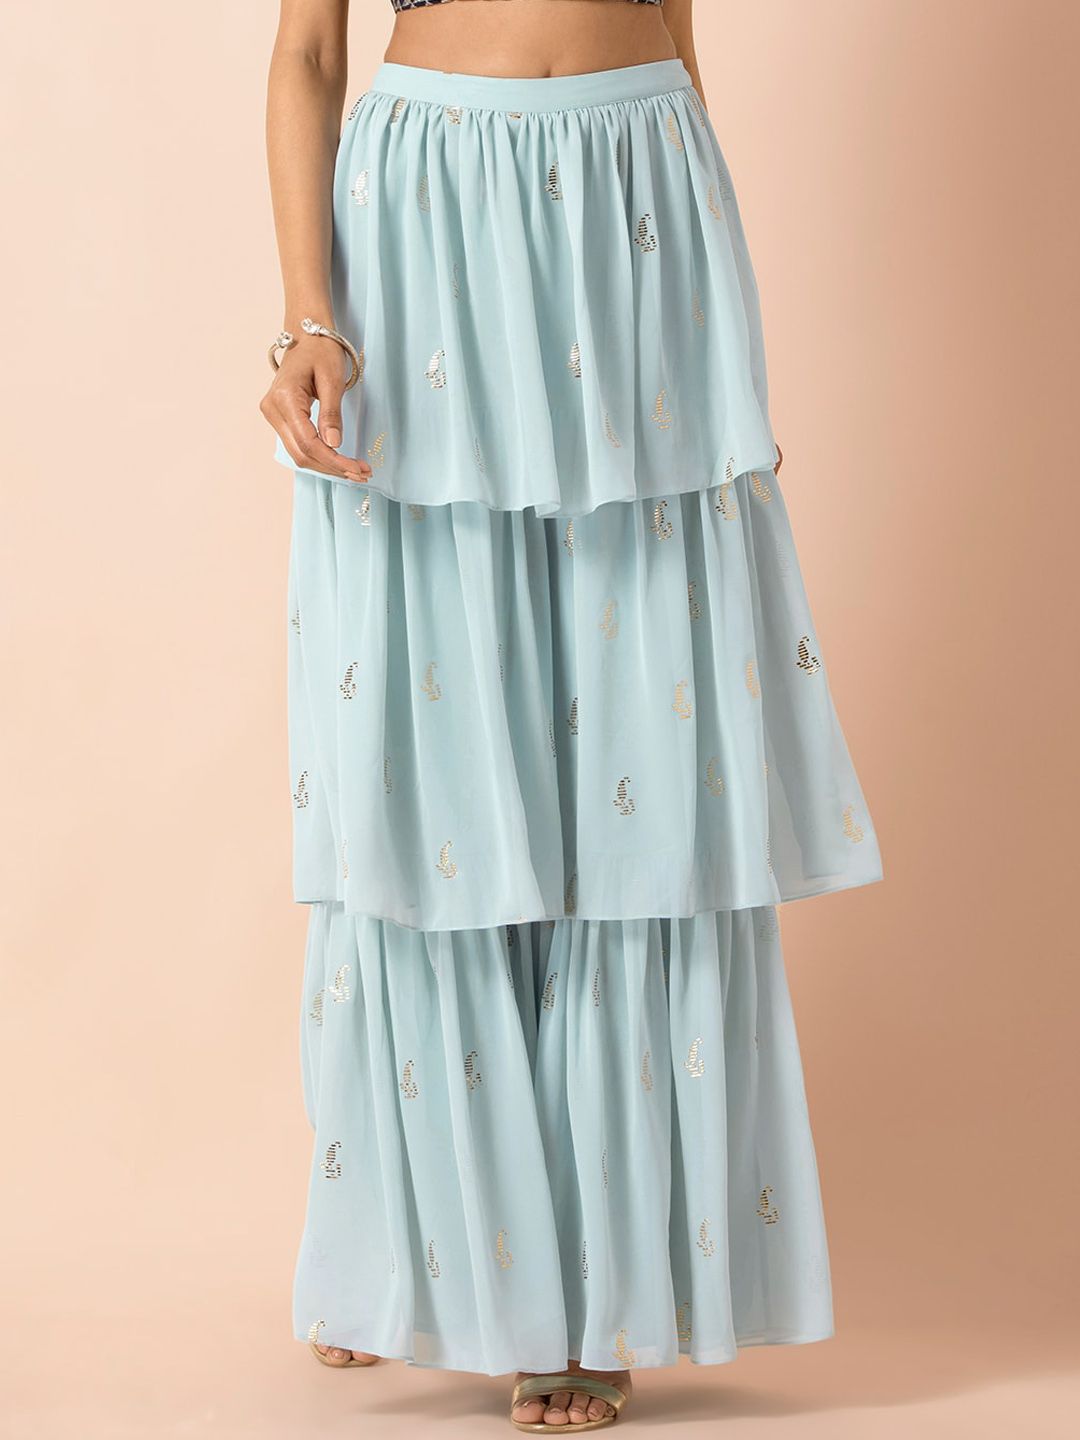 INDYA X PAYAL SINGHAL Women Blue & Silver-Toned Printed Tiered Ruffled Sharara Price in India